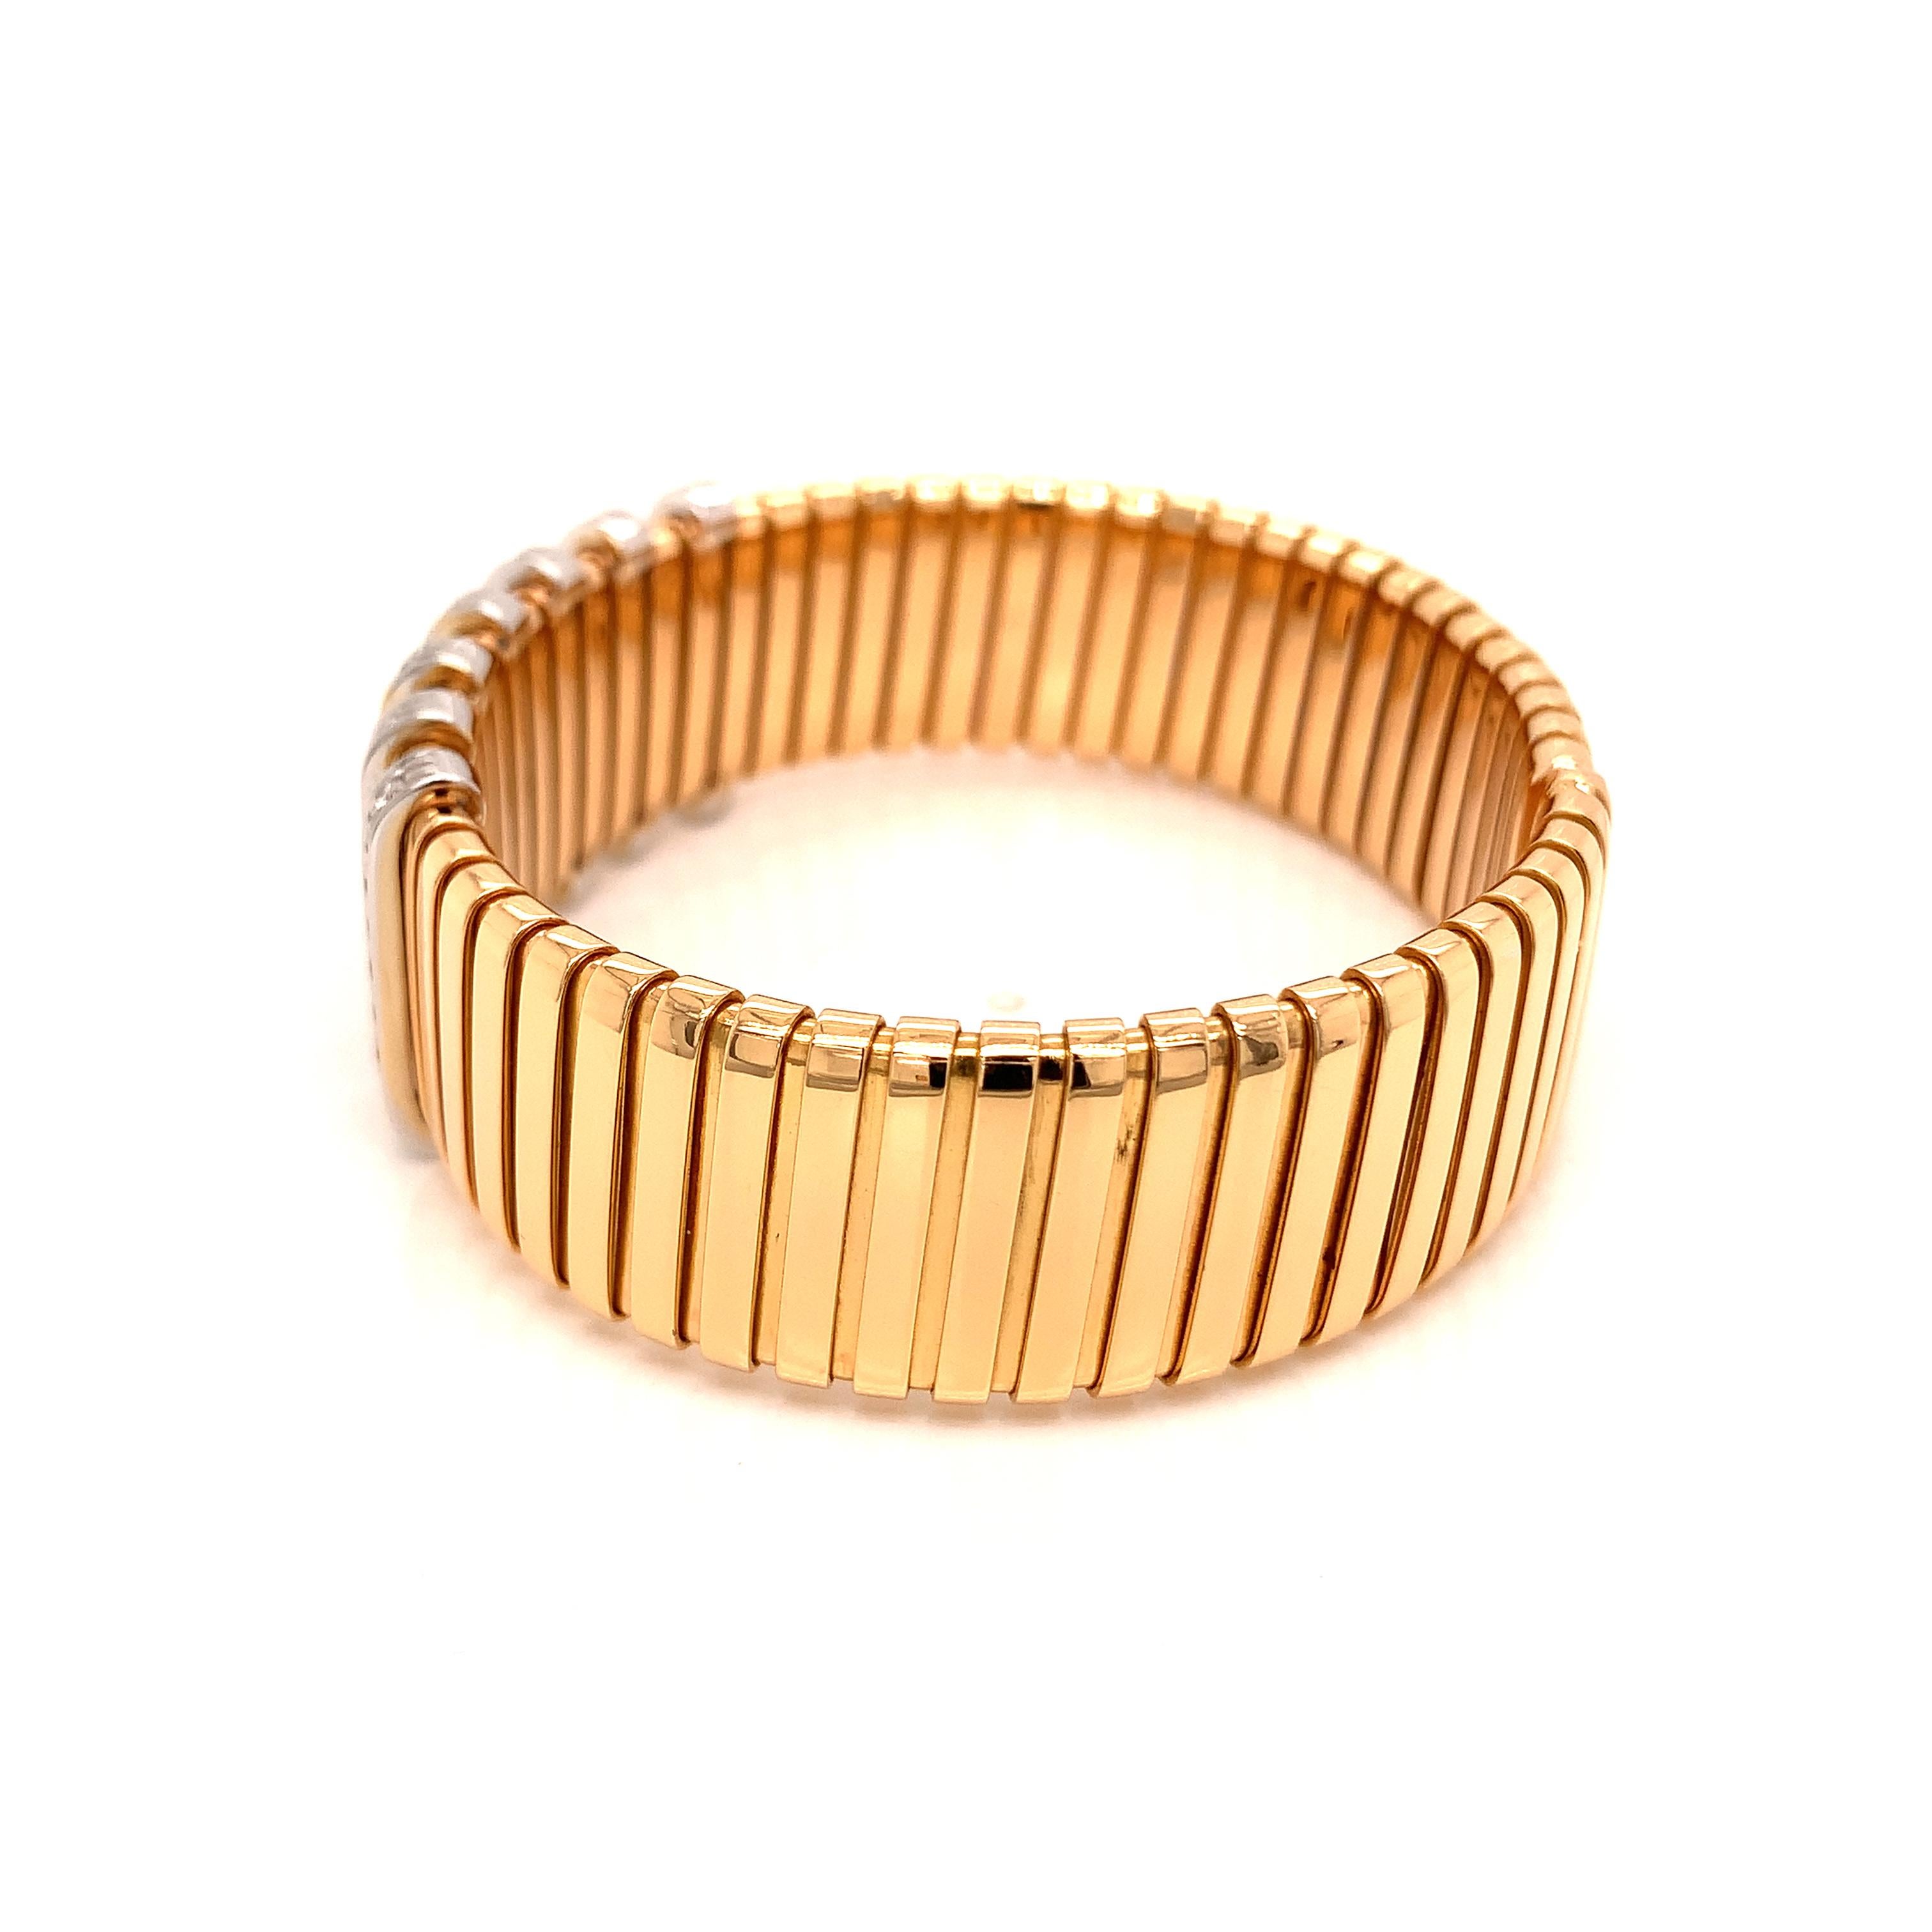 On sale on First Dibs only for 3 week.  This beautiful ring is a stunning piece created in Valenza.
An Italian  18kt Rose Gold Bracelet with Diamond Stations . Flat Large  tubogas with 7white gold diamonds stripes 
Wrist size 16cm,  inches 6.30. 